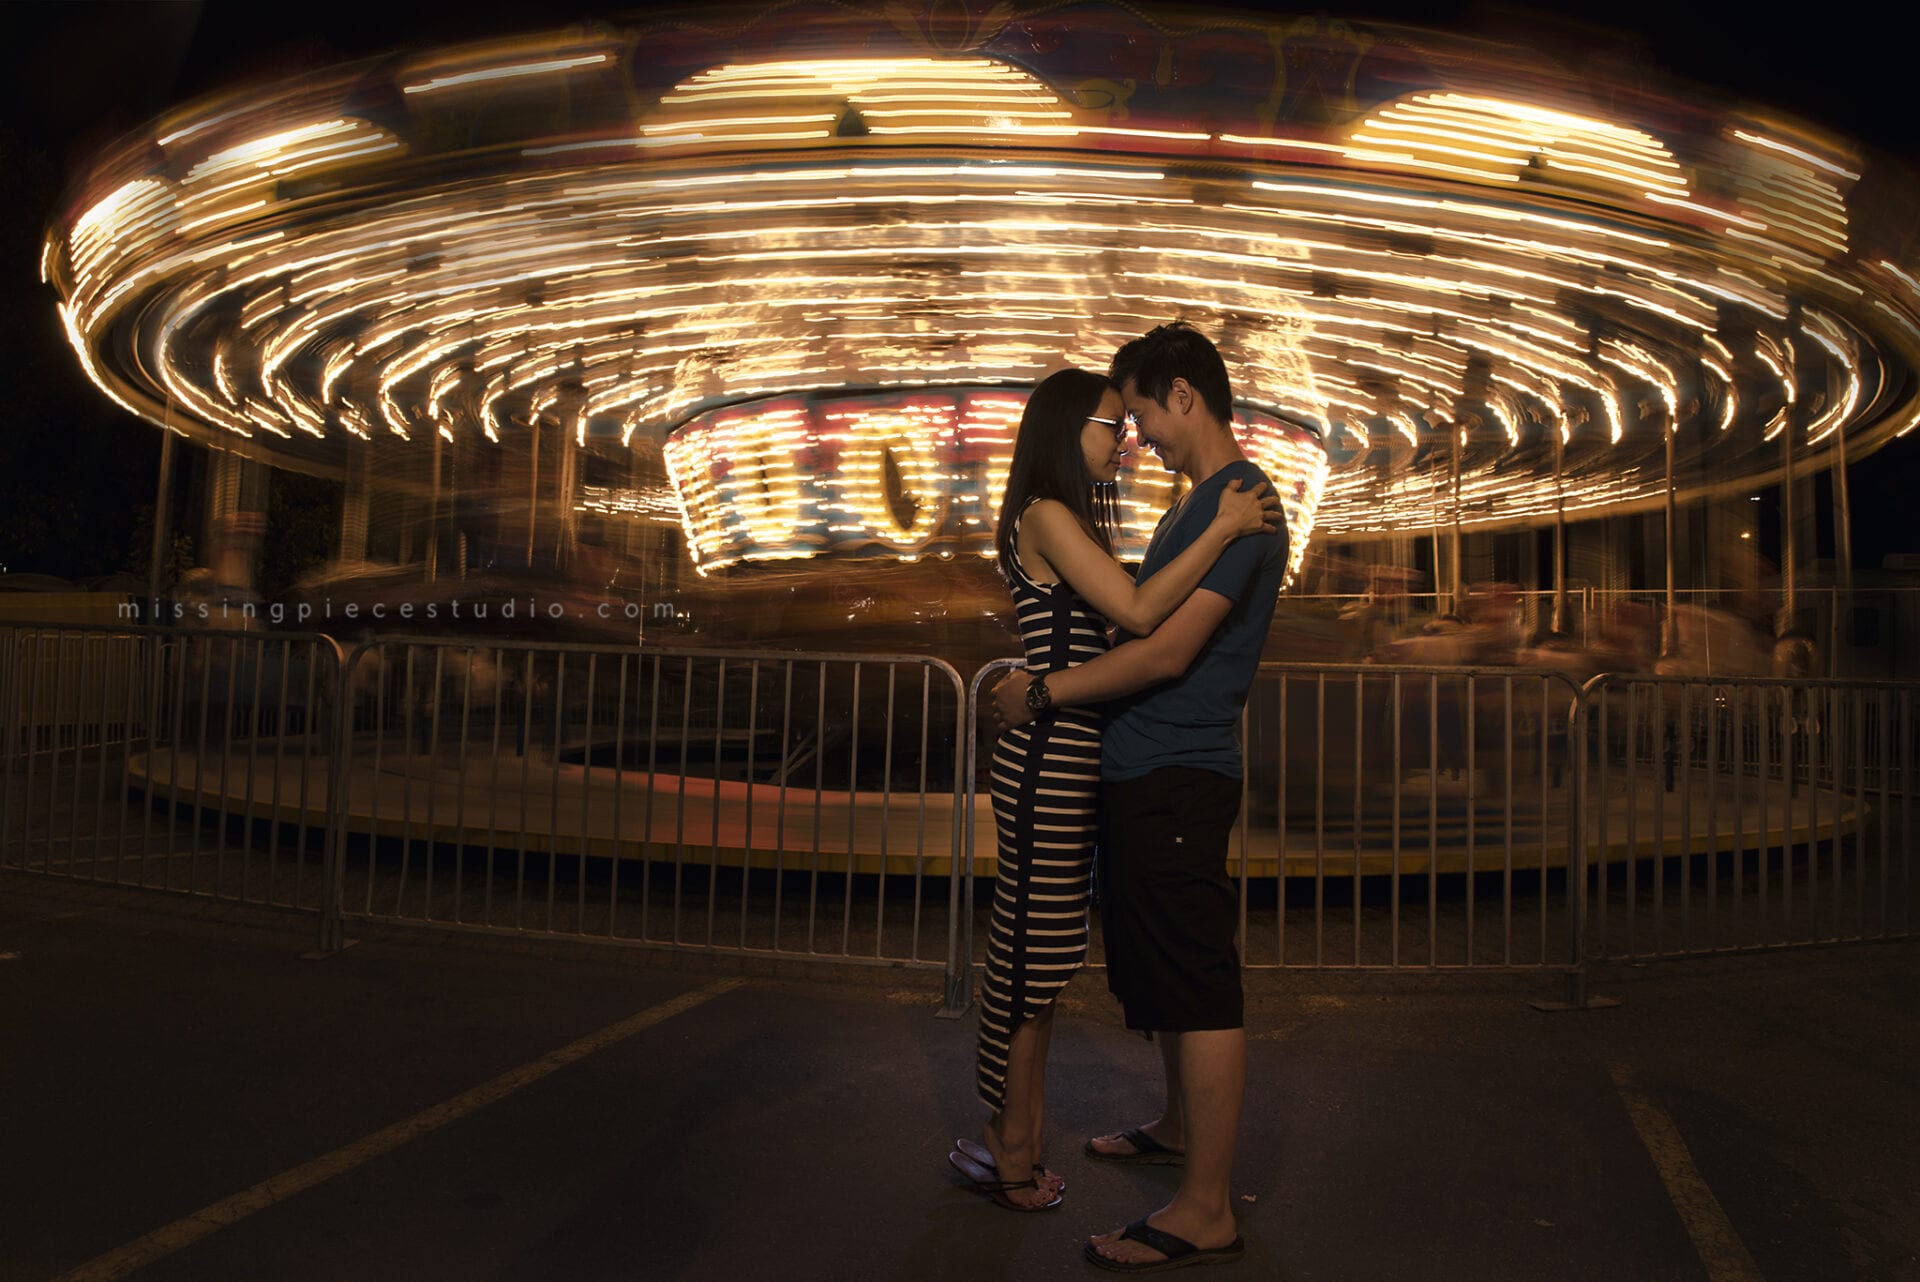 A couple posed in front of a spinning merry go round carousel